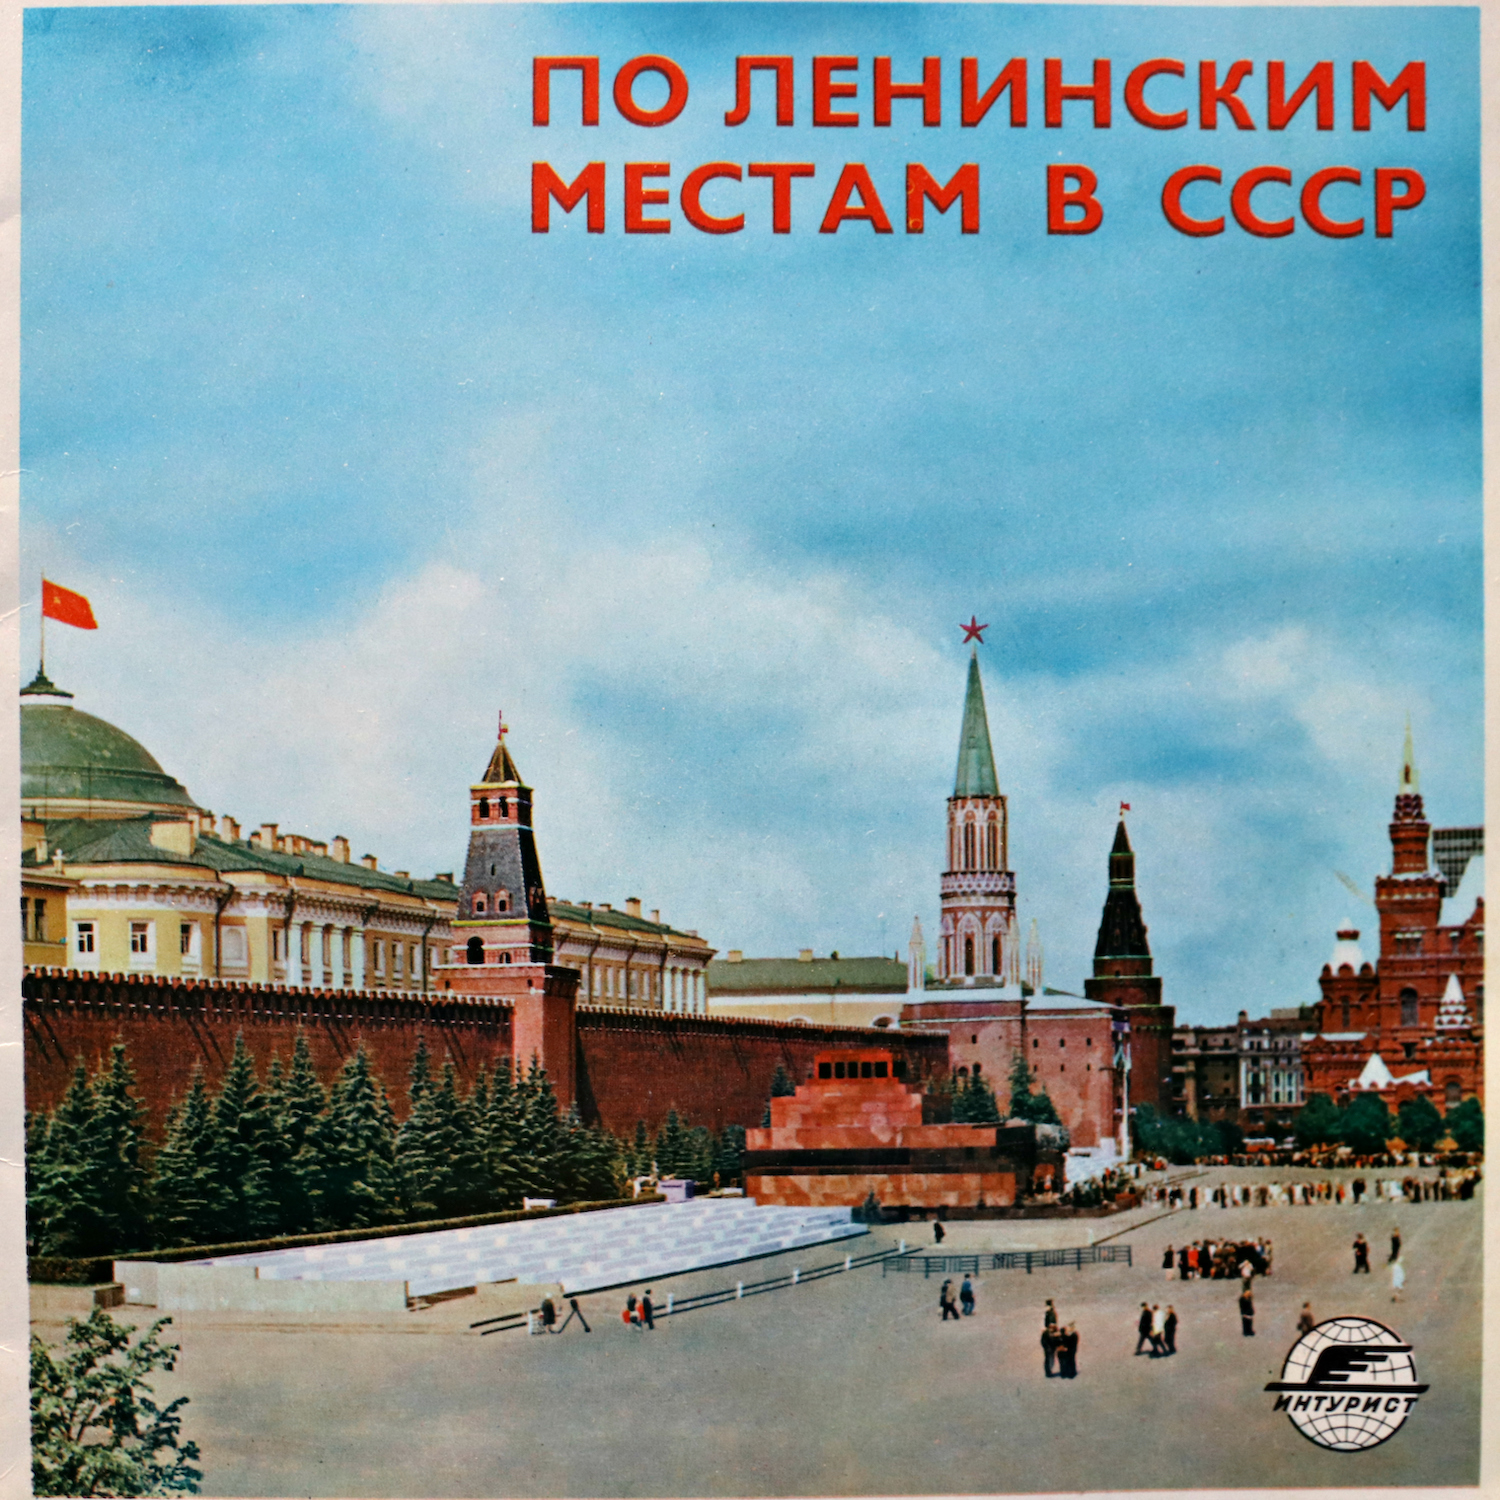 A Soviet guide to The Lenin-related places of the Soviet Union.